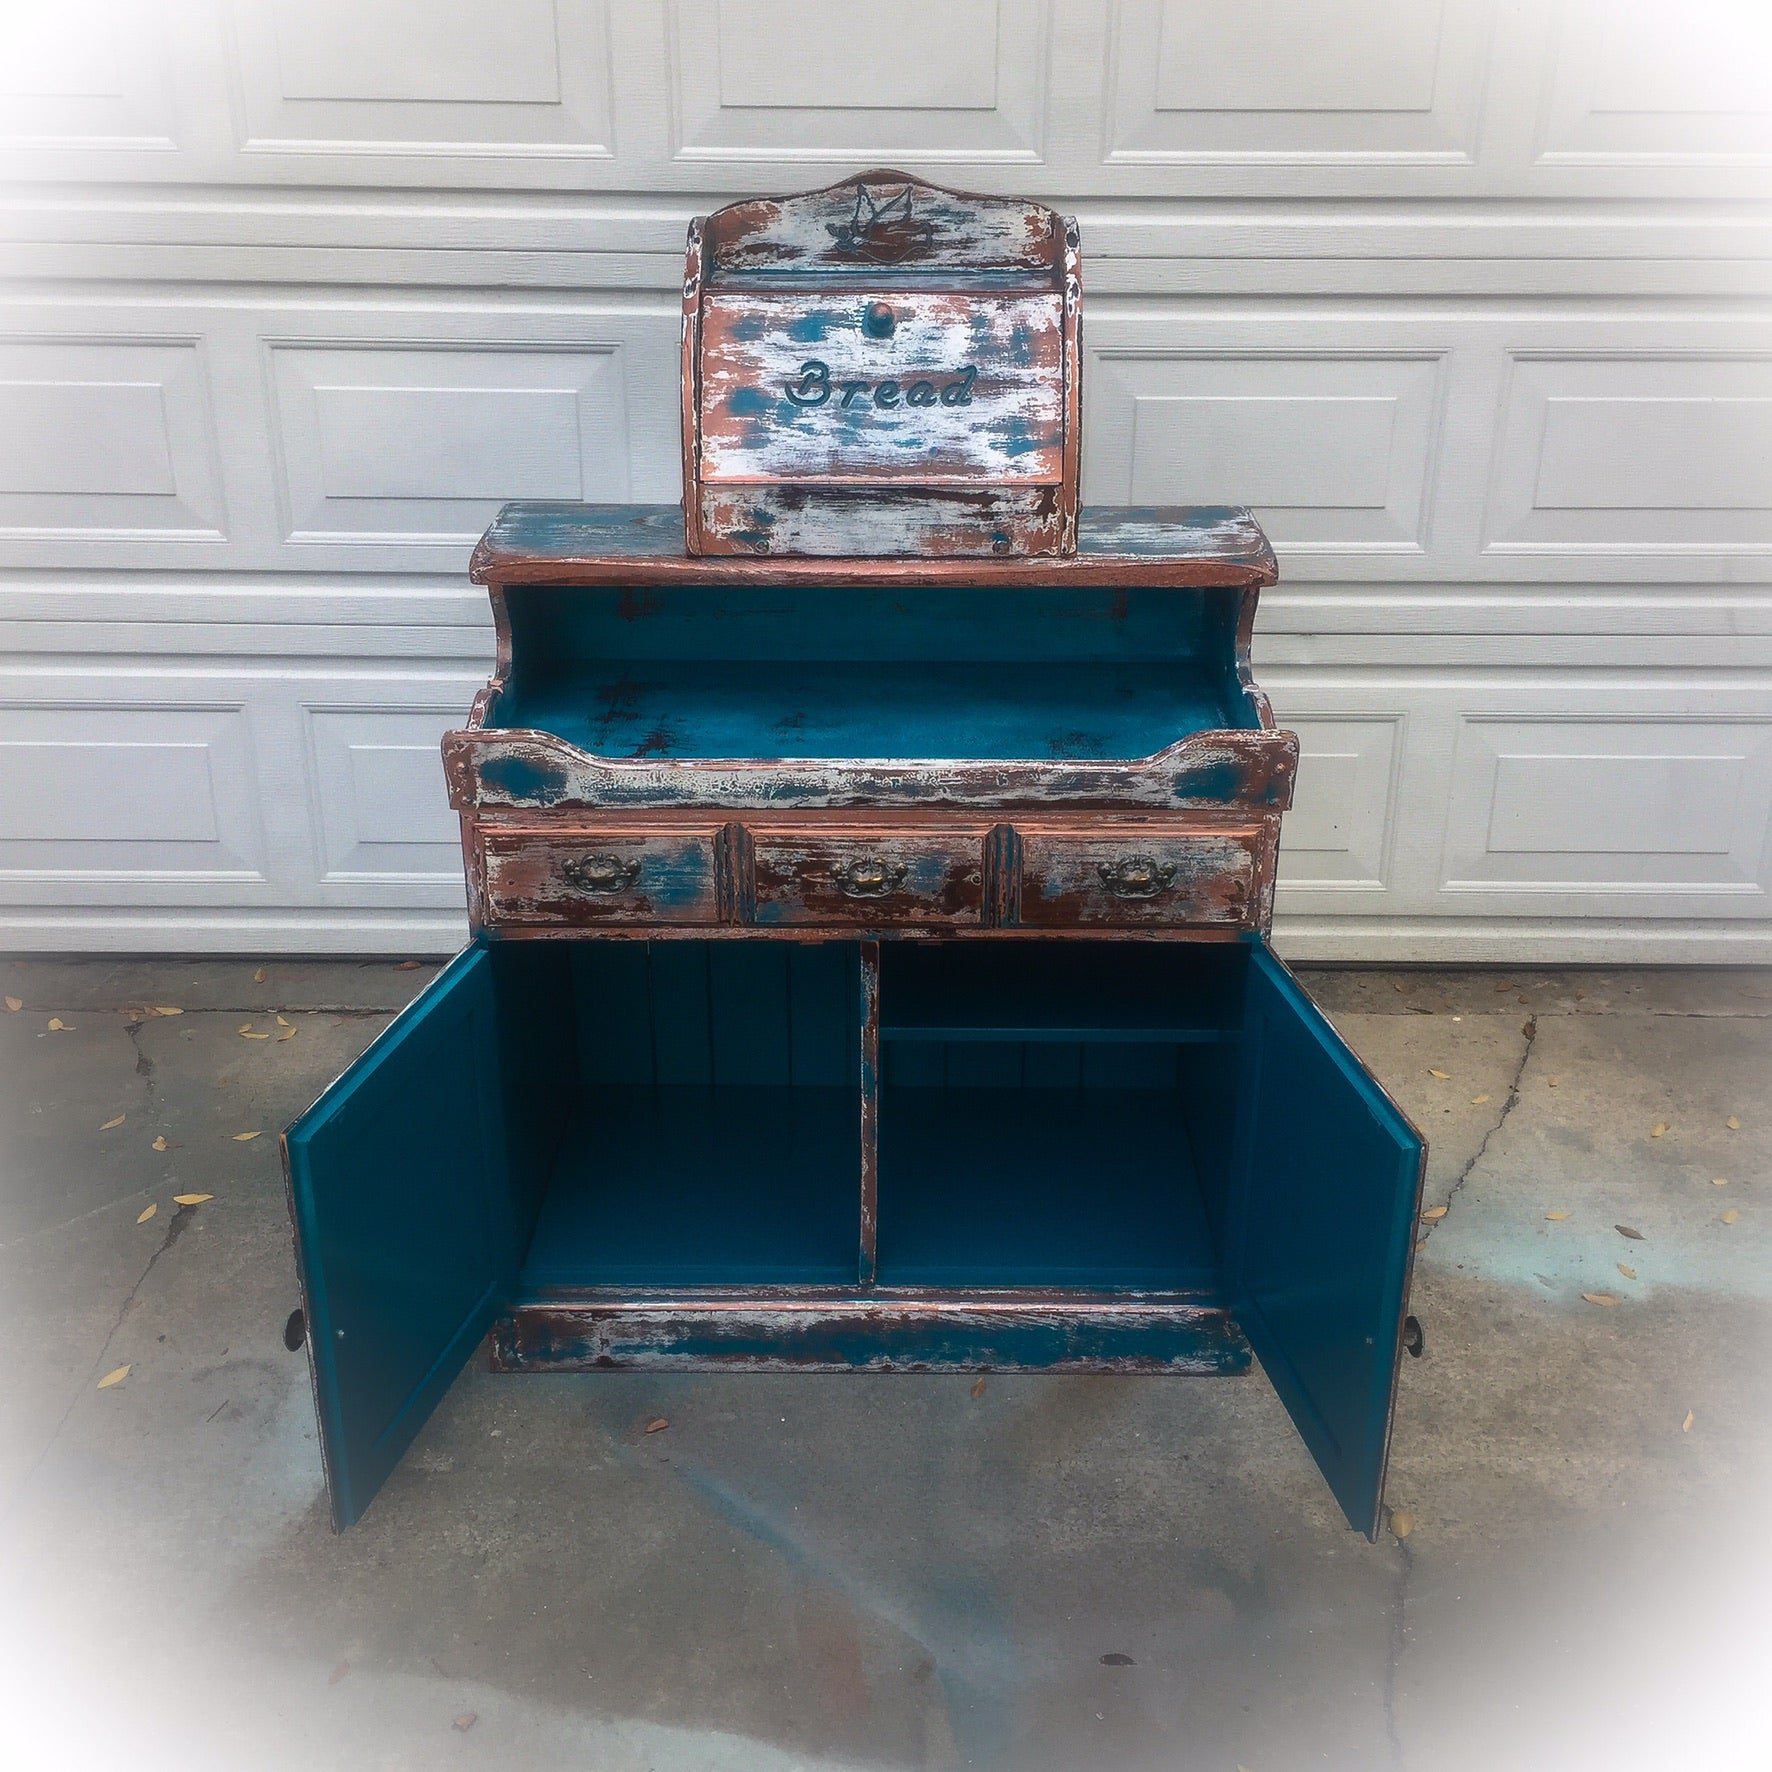 A piece of vintage furniture, repurposed into a coffee bar, painted in distressed blue, shown with it’s cabinet area open.